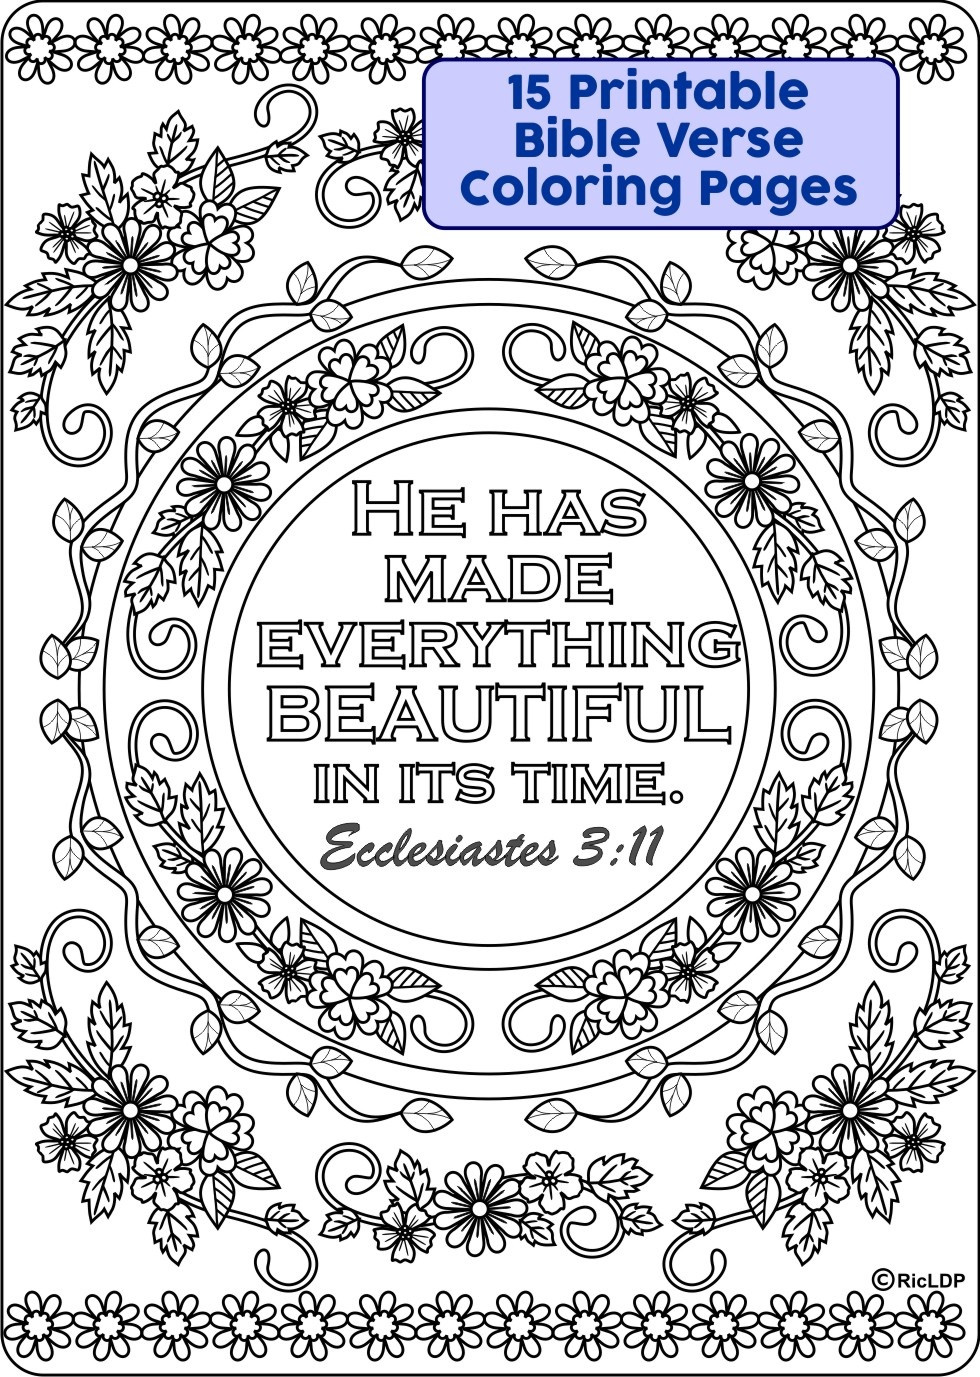 Bible Verse Coloring Pages Free Printable
 15 Printable Bible Verse Coloring Pages